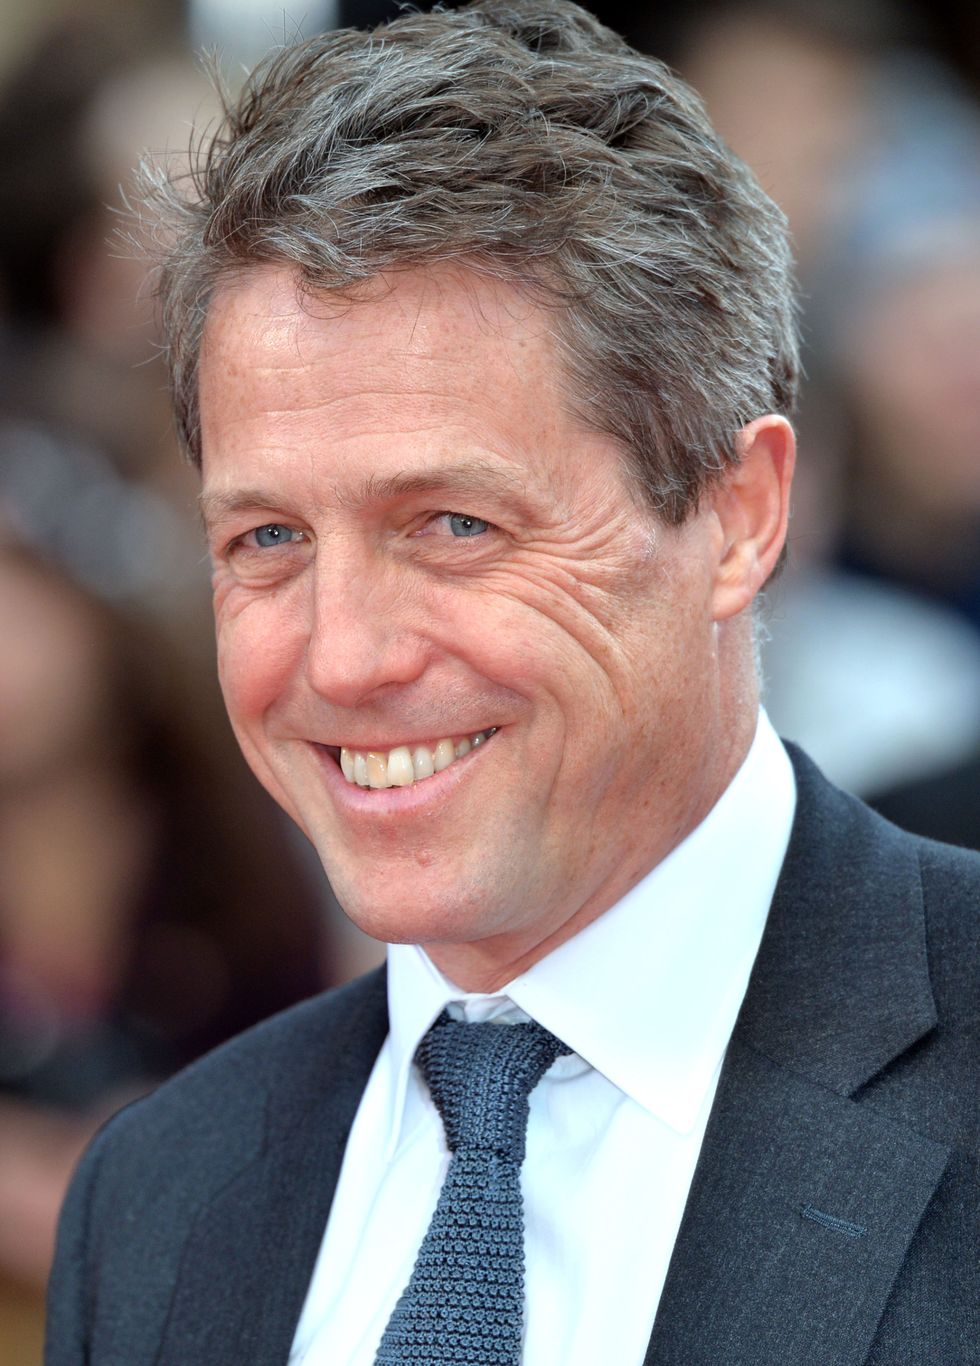 <p>"I'm not really a believer in marriage," the 55-year-old father of three children said to <em>People</em> <a href="http://www.people.com/article/hugh-grant-never-getting-married">in 2015</a>.  "I've seen very few good examples, maybe five, in my life, but I think otherwise it's a recipe for mutual misery."</p>